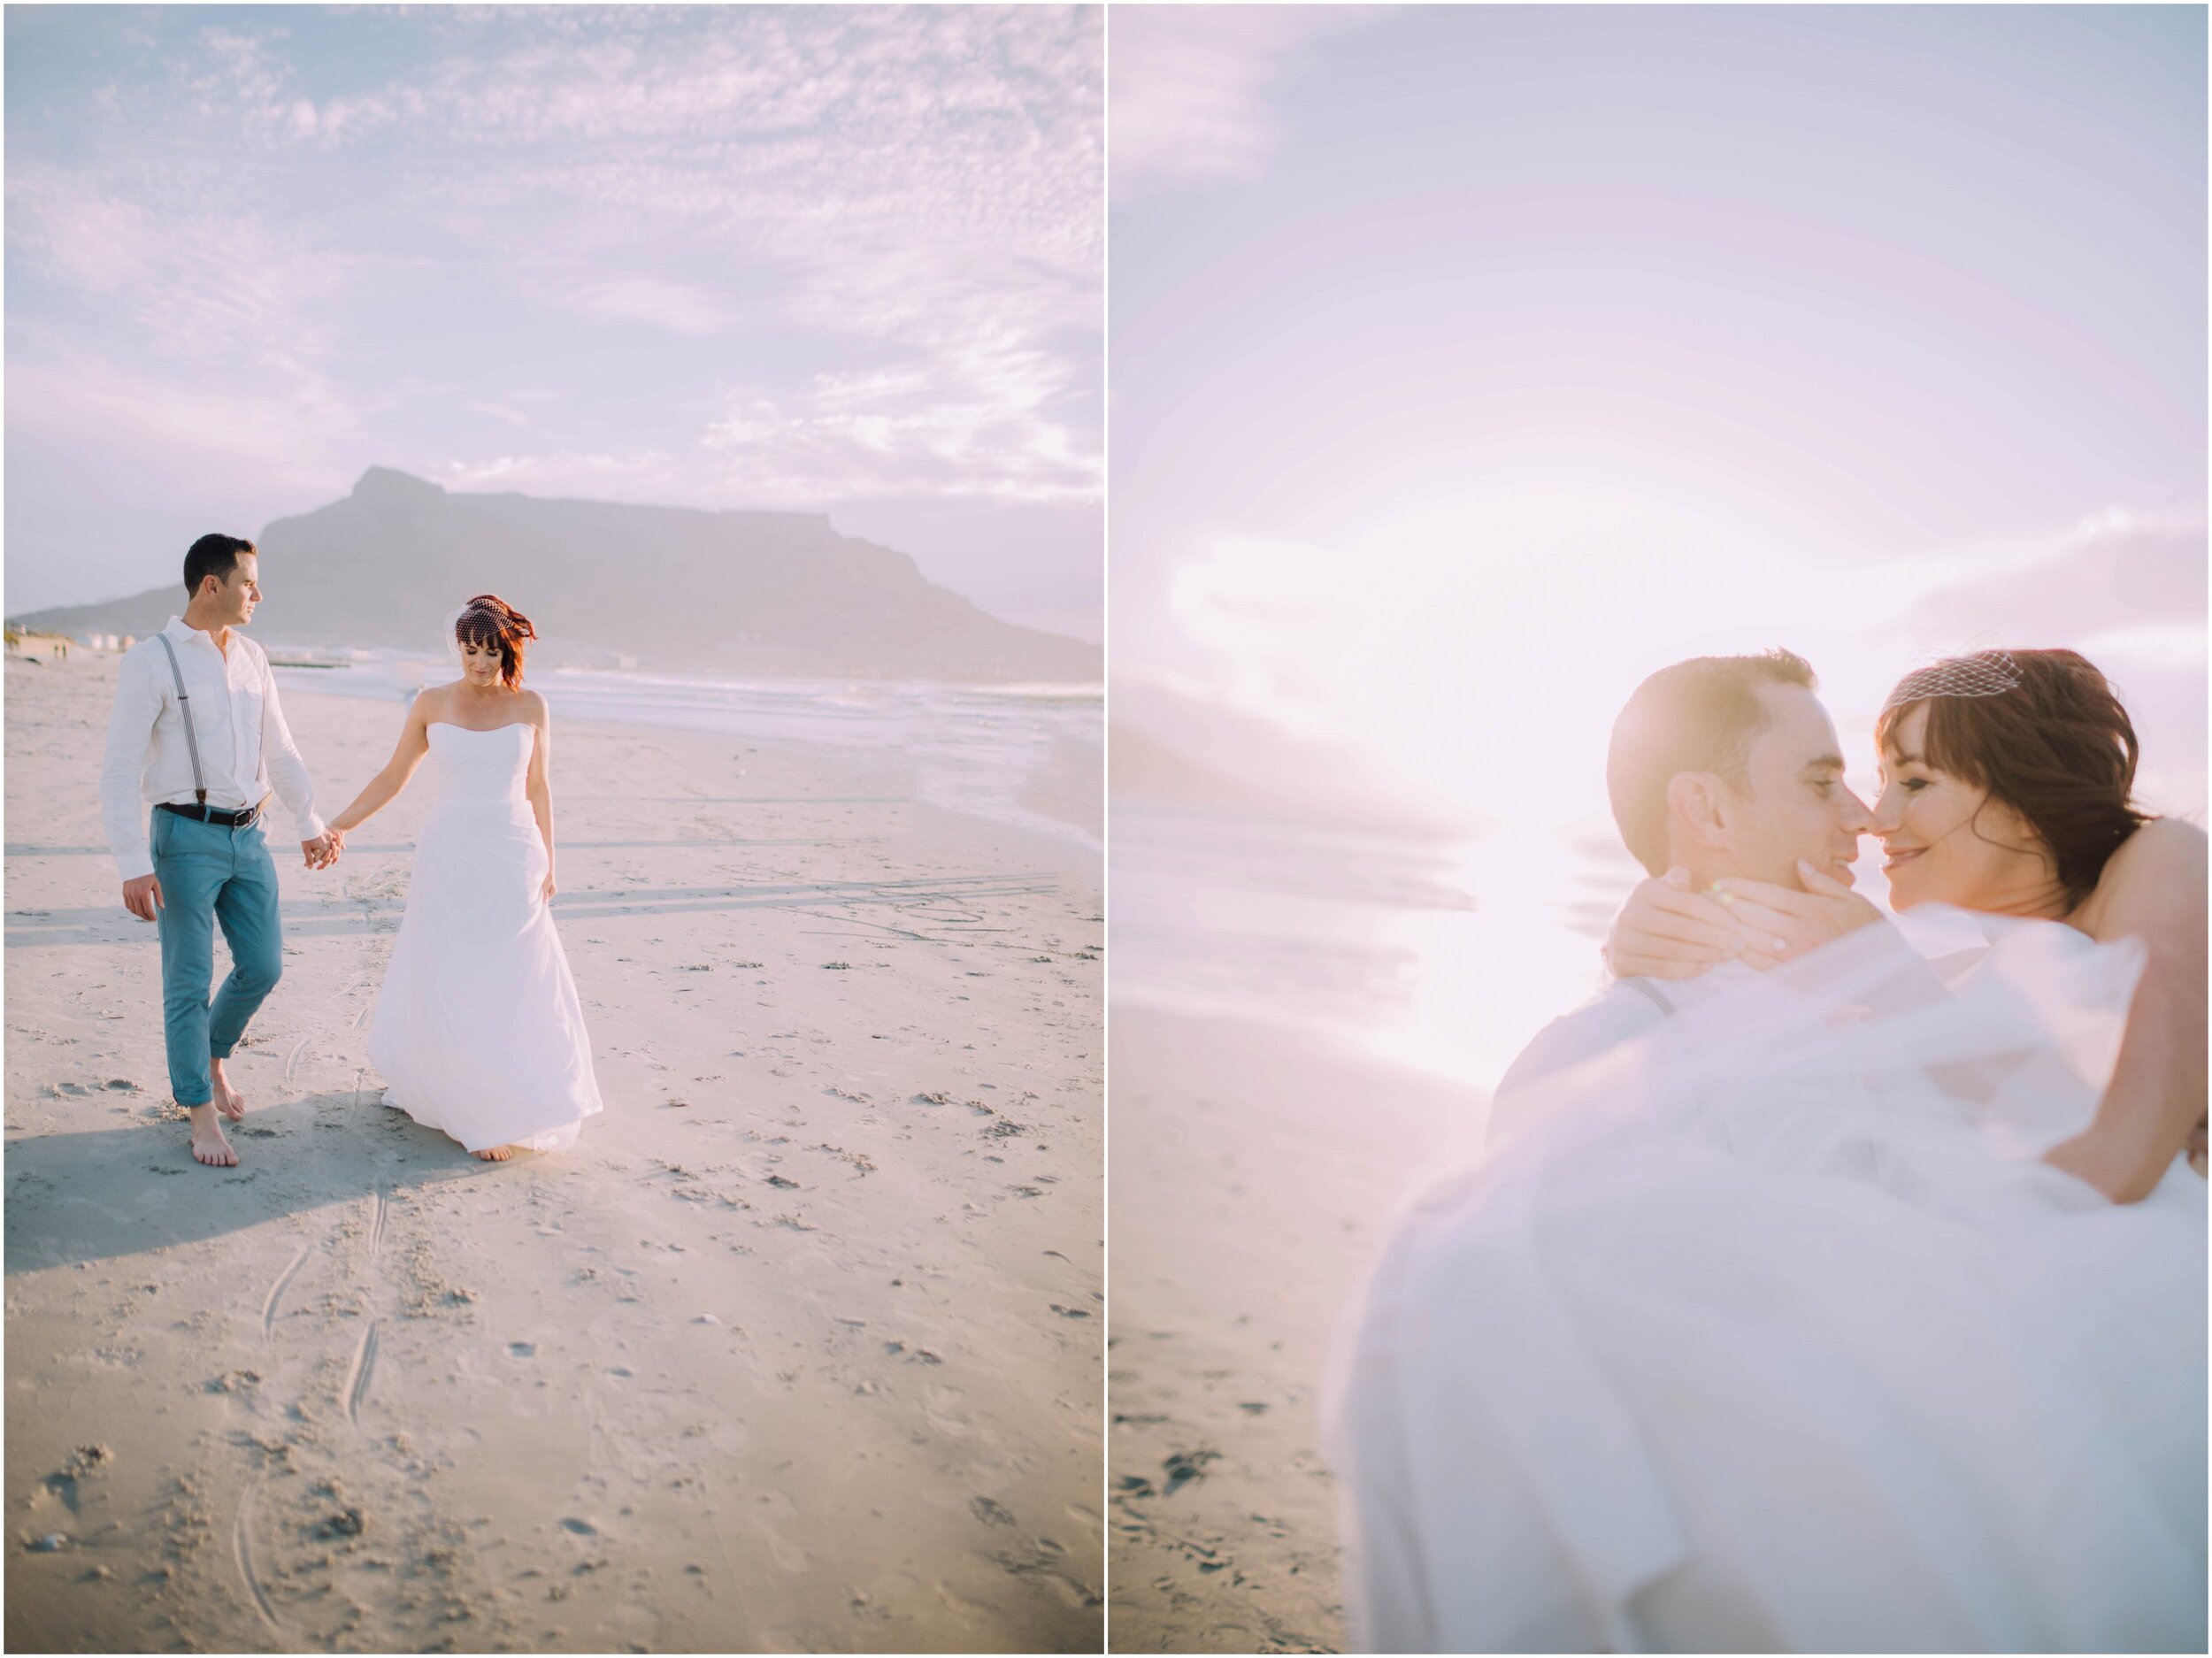 Top Wedding Photographer Cape Town South Africa Artistic Creative Documentary Wedding Photography Rue Kruger_2109.jpg